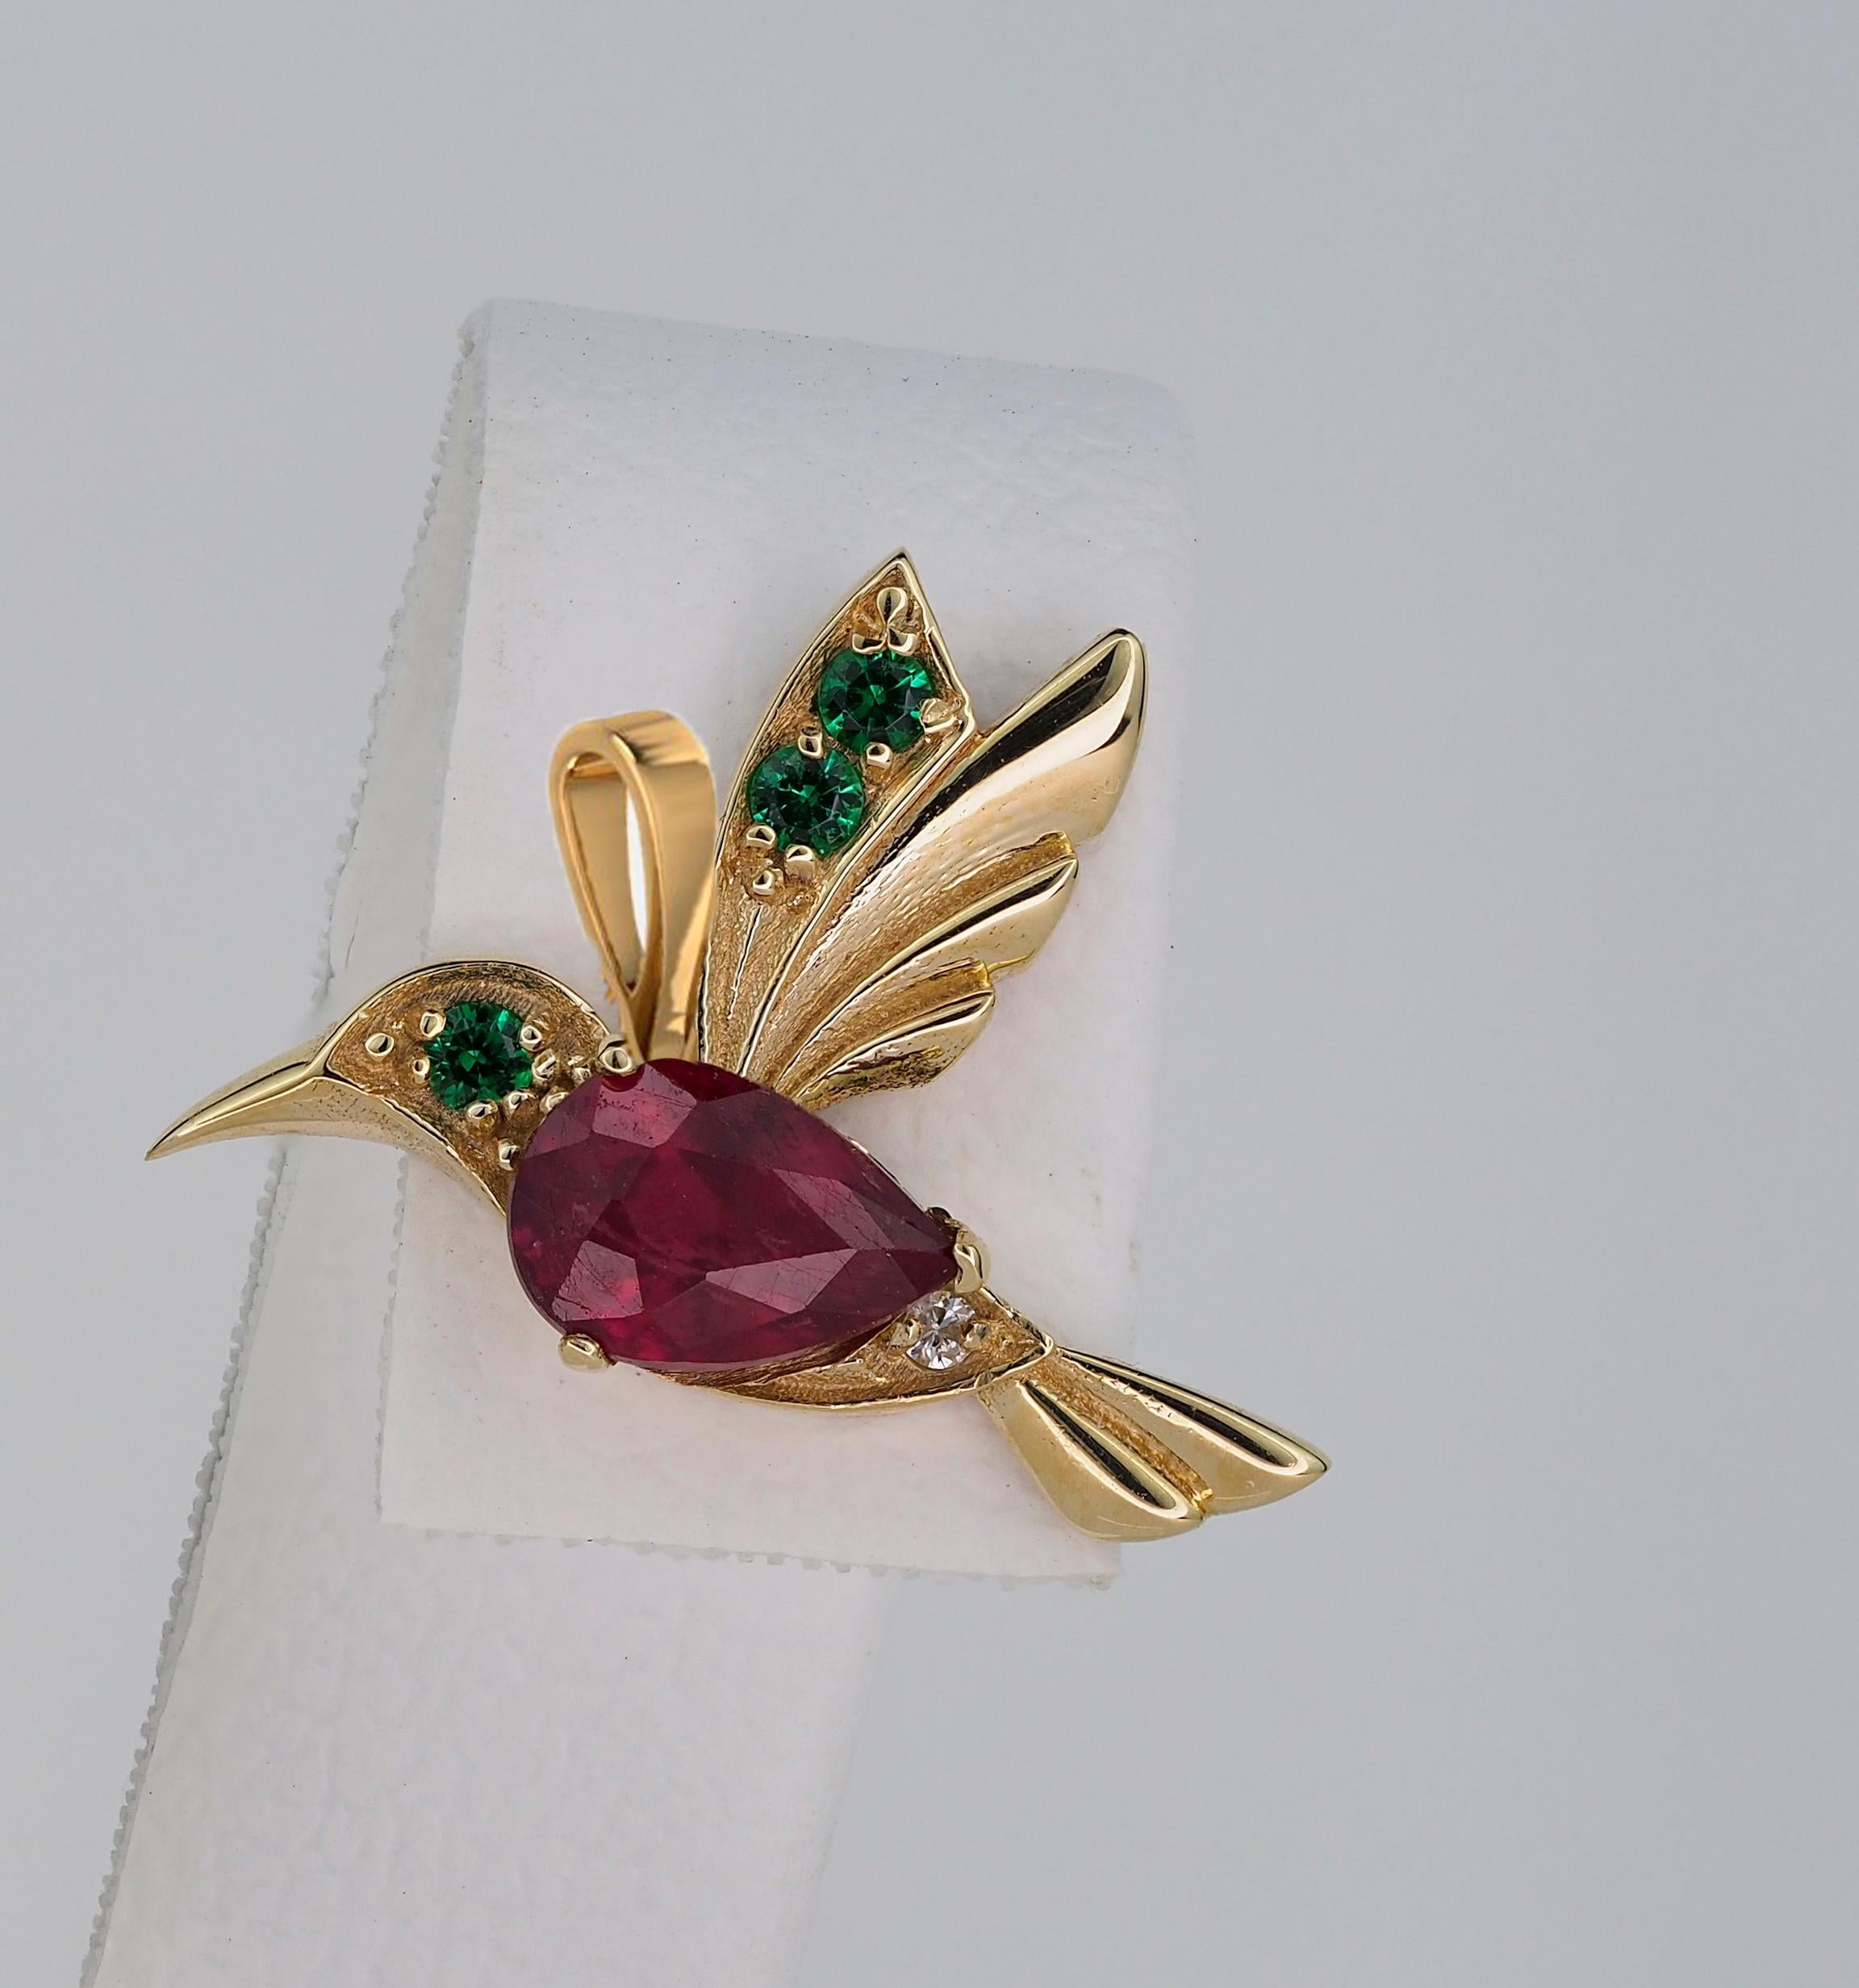 14k Gold Hummingbird Pendant with Rubies, Bird Pendant with Colored Gemstones For Sale 4